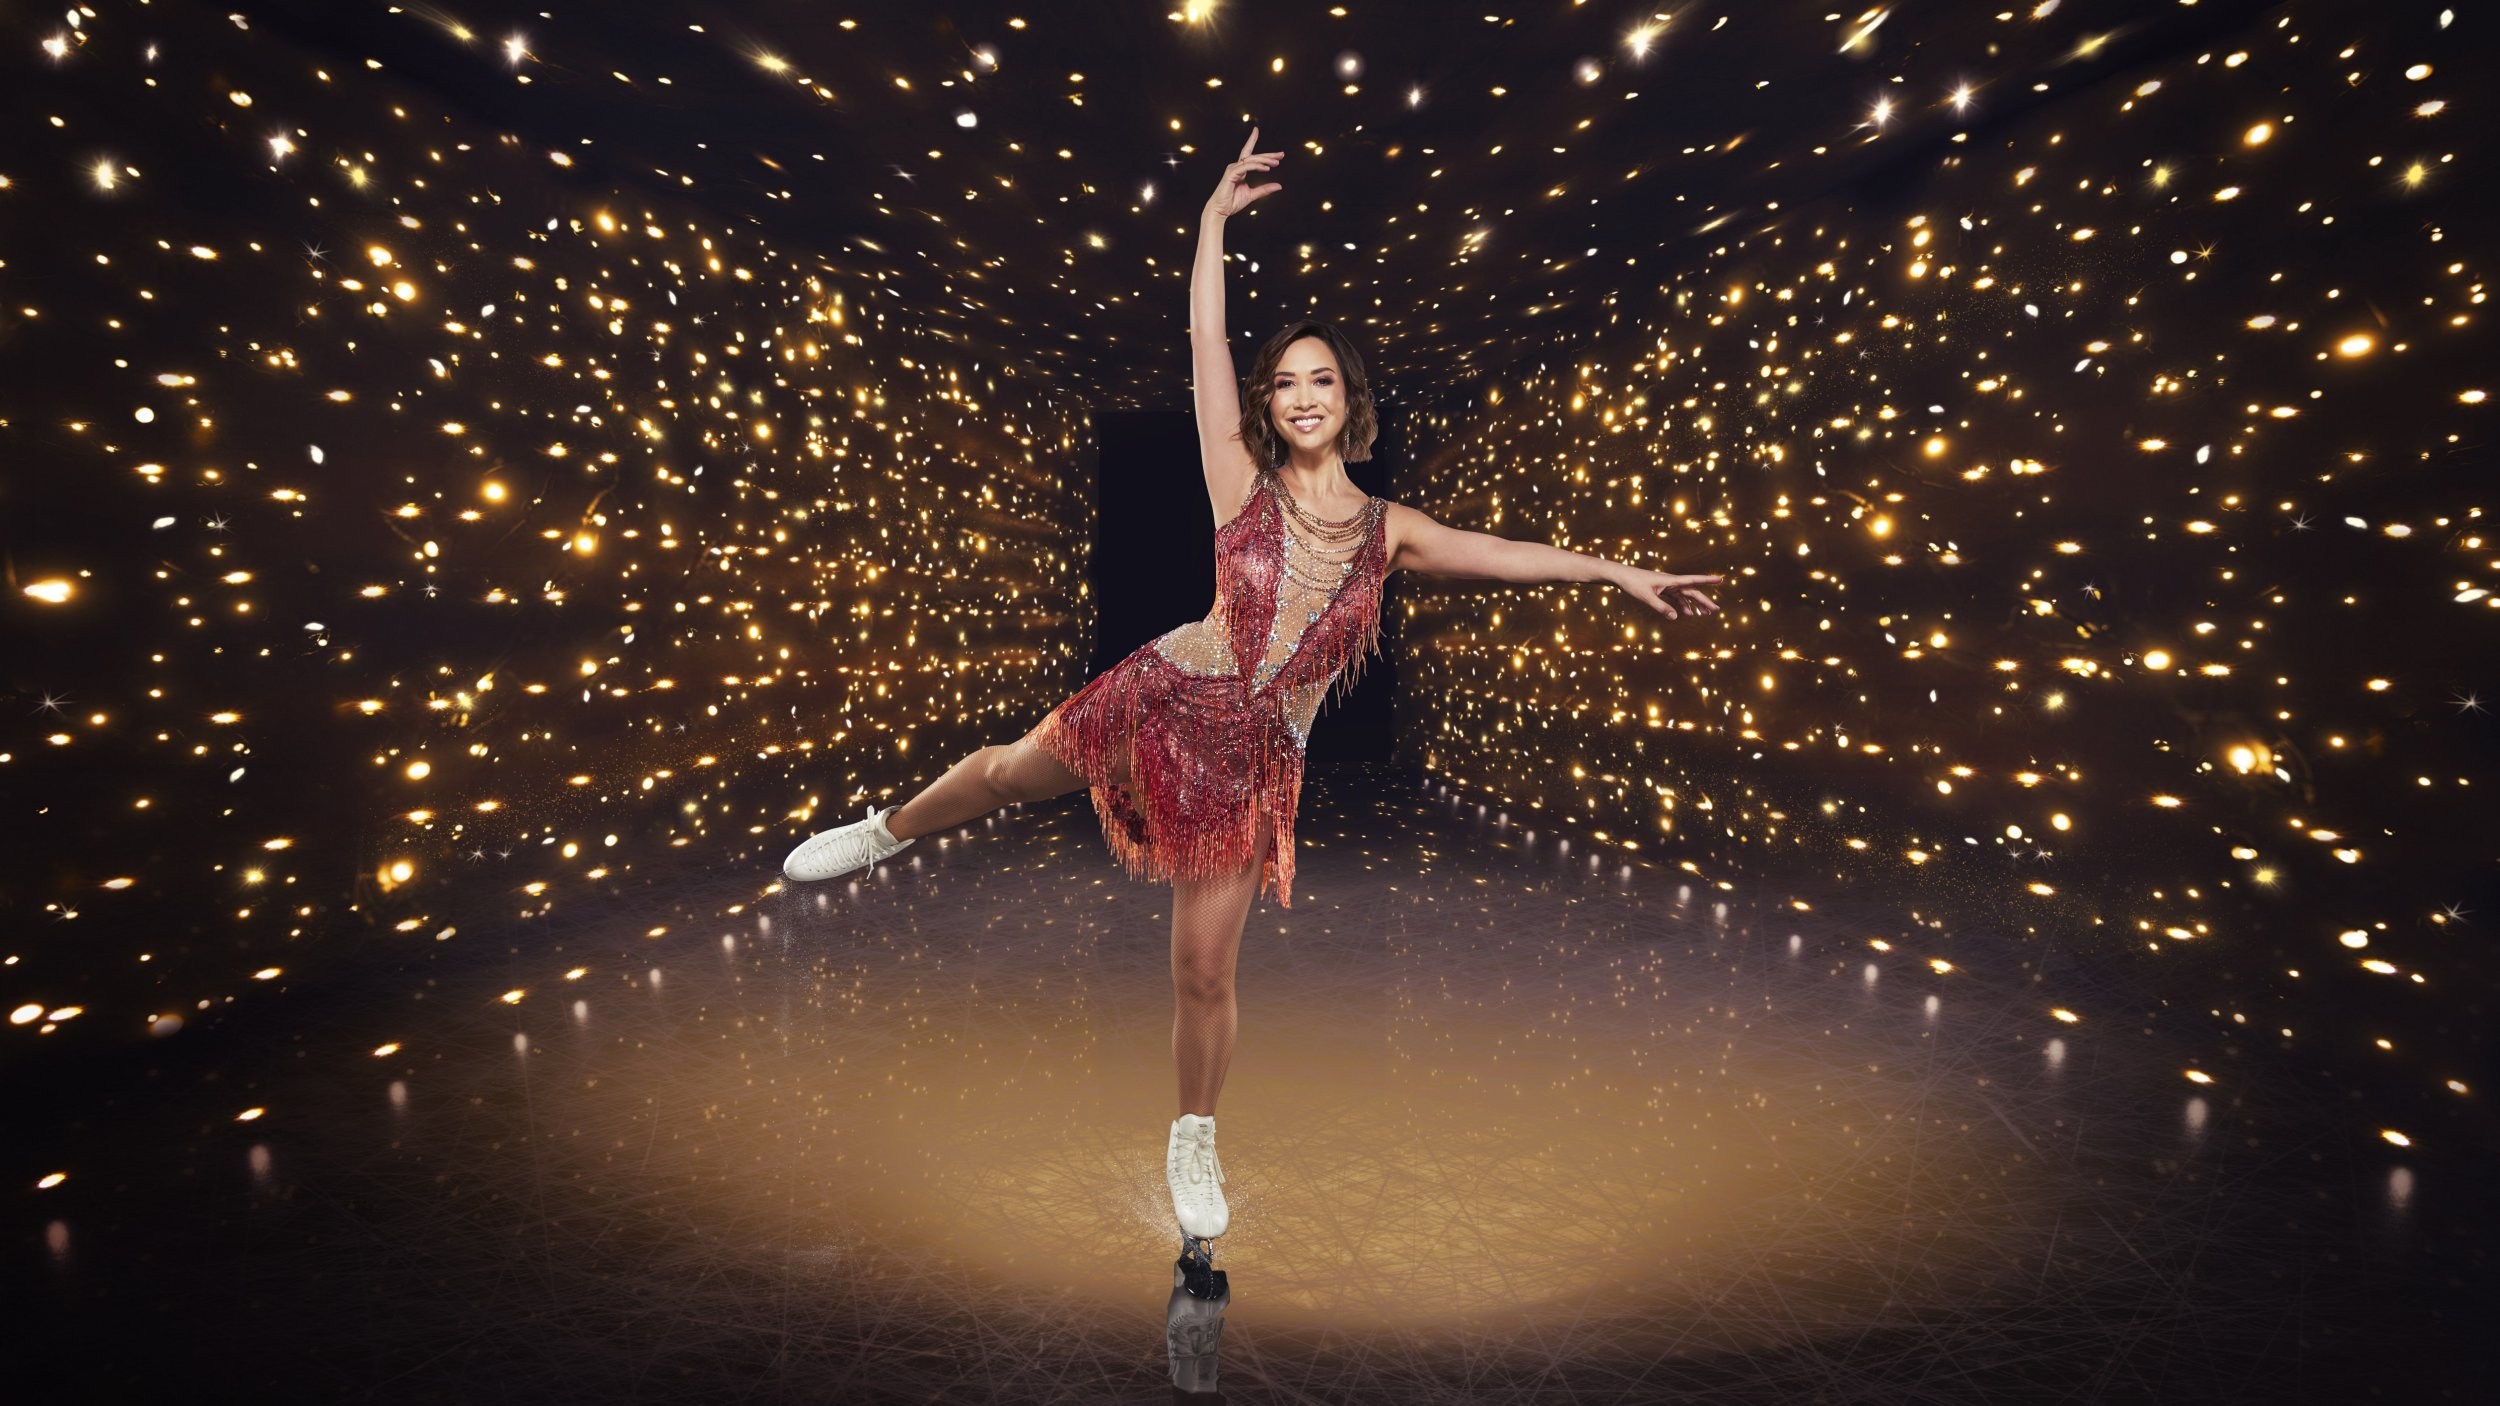 Who is Myleene Klass’ fiance and do they have children as she makes her Dancing On Ice debut?